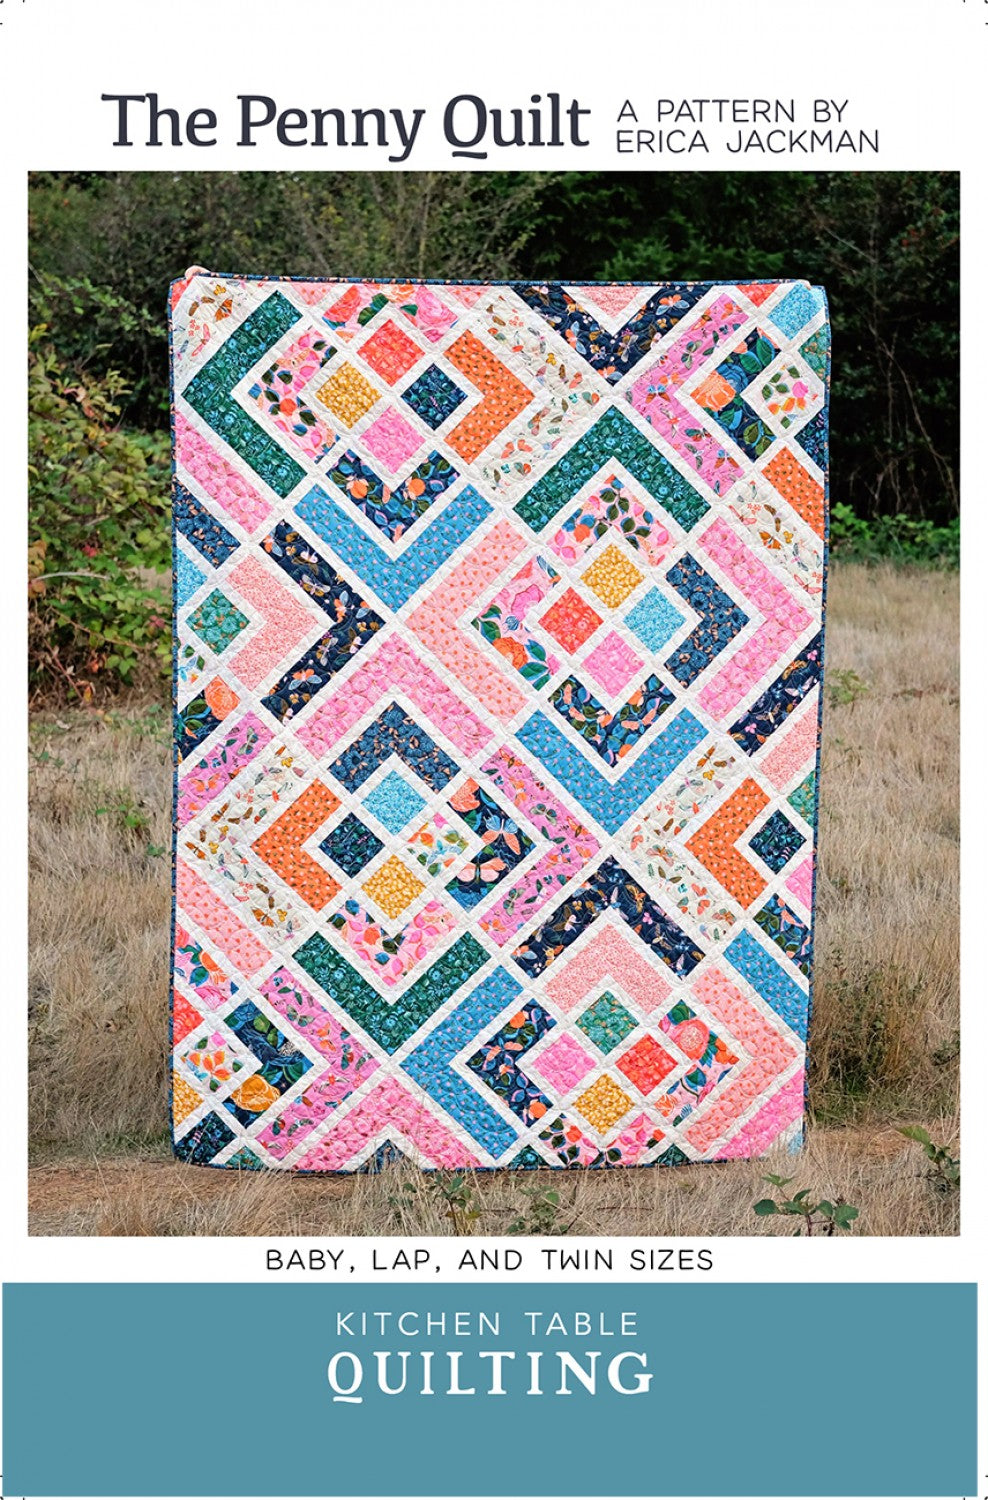 The Penny Quilt